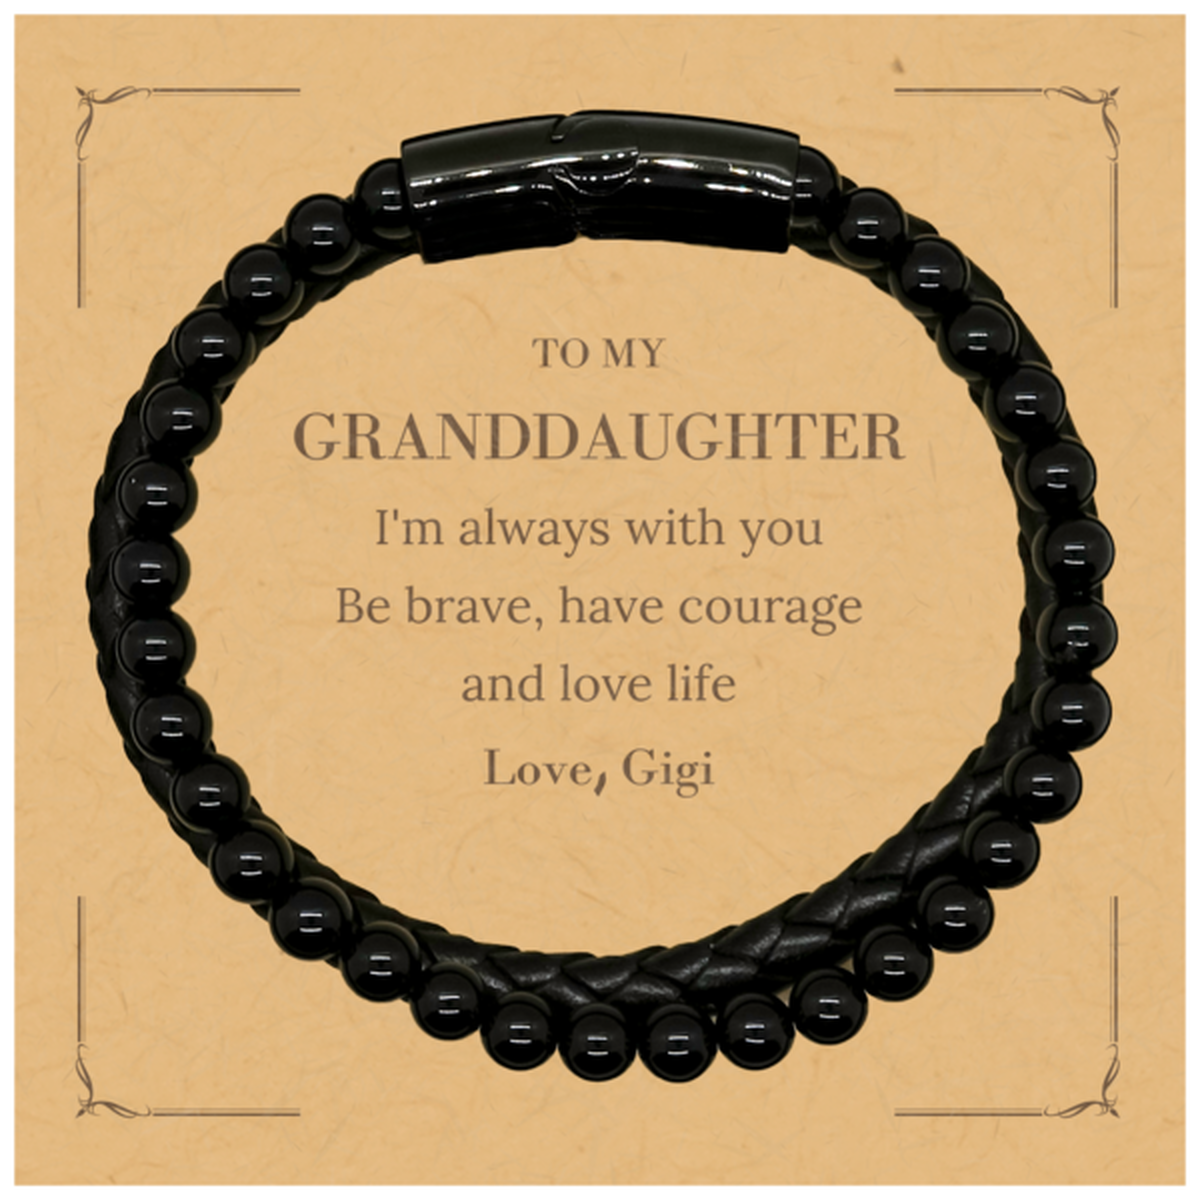 To My Granddaughter Gifts from Gigi, Unique Stone Leather Bracelets Inspirational Christmas Birthday Graduation Gifts for Granddaughter I'm always with you. Be brave, have courage and love life. Love, Gigi